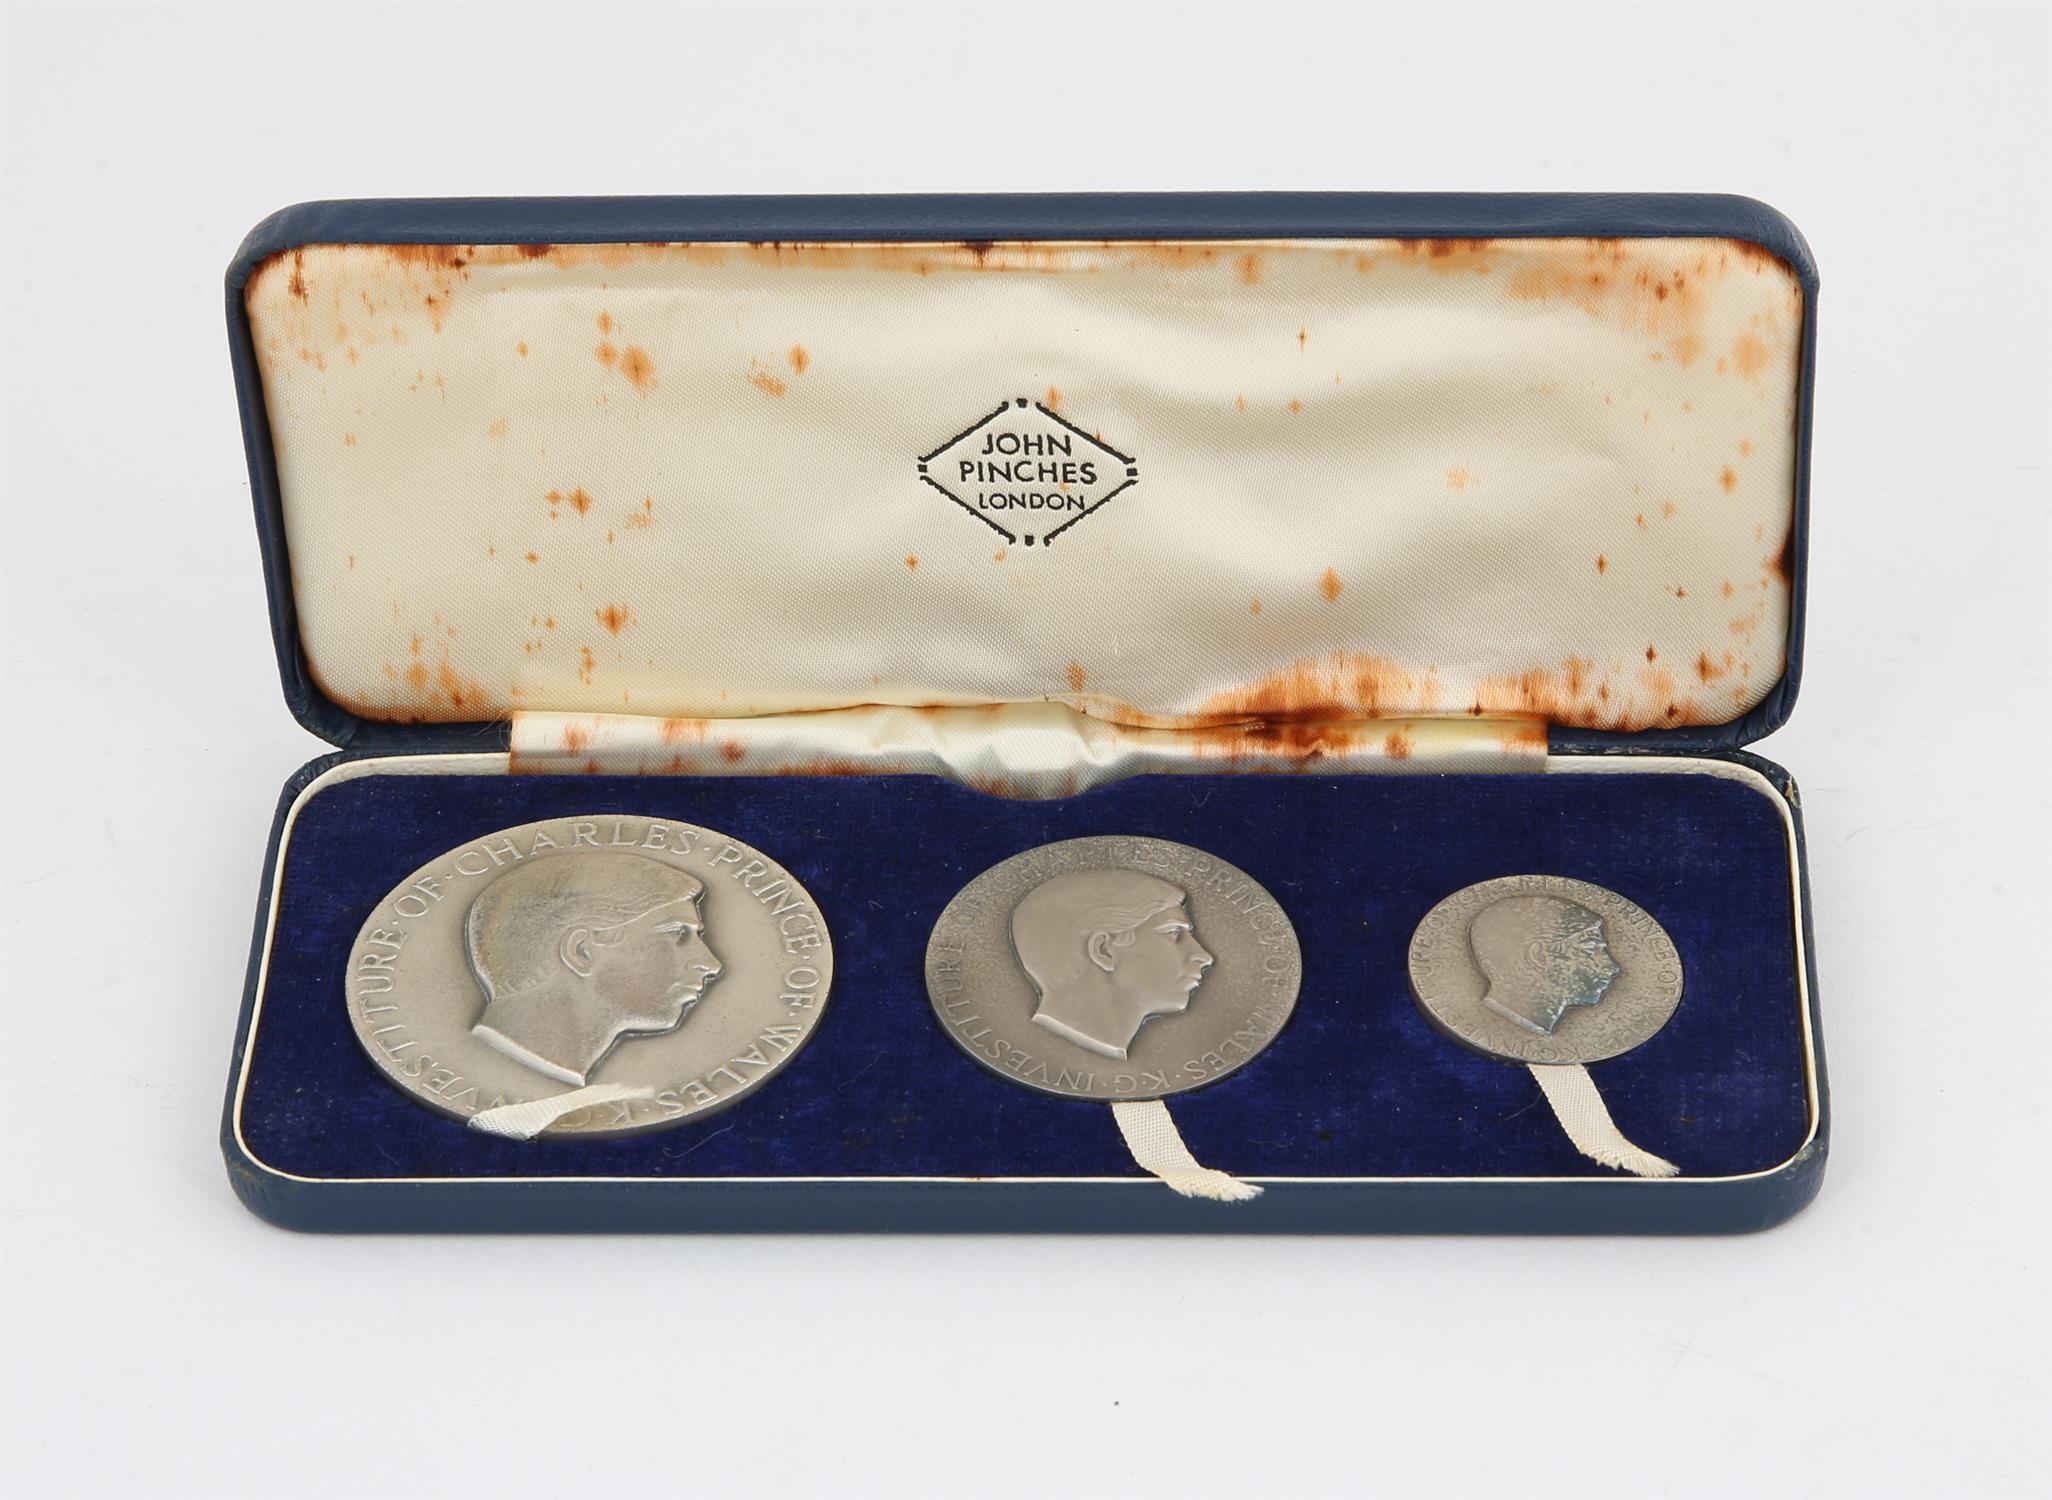 1969 Britannia silver Prince of Wales Investiture three-piece coin set by John Pinches of London, - Image 4 of 6